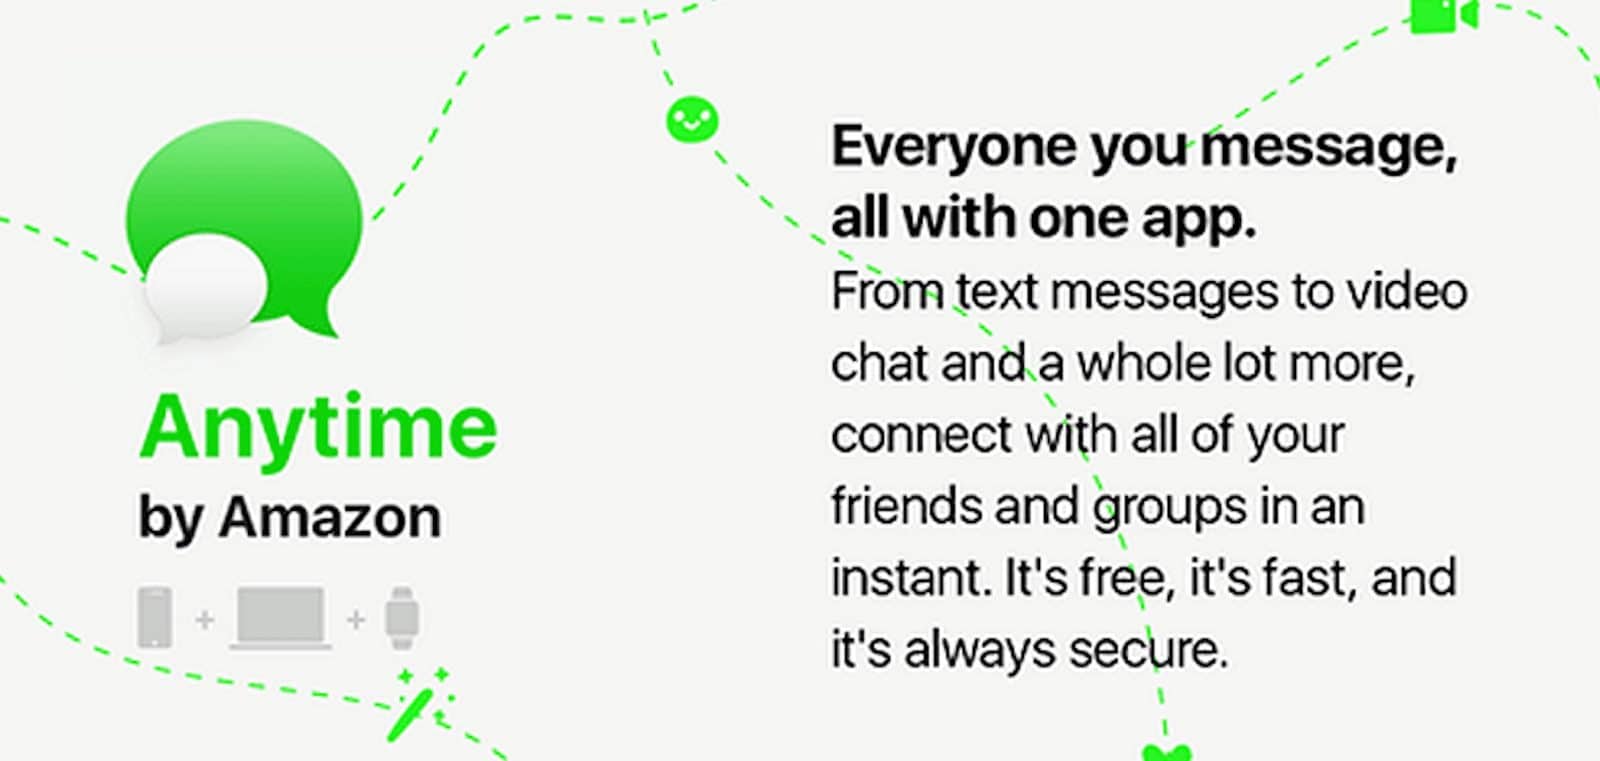 Amazon is working a messaging app called Anytime for group communication.Amazon’s Anytime will have standard messaging features such as encryption, video support, audio support, and stickers